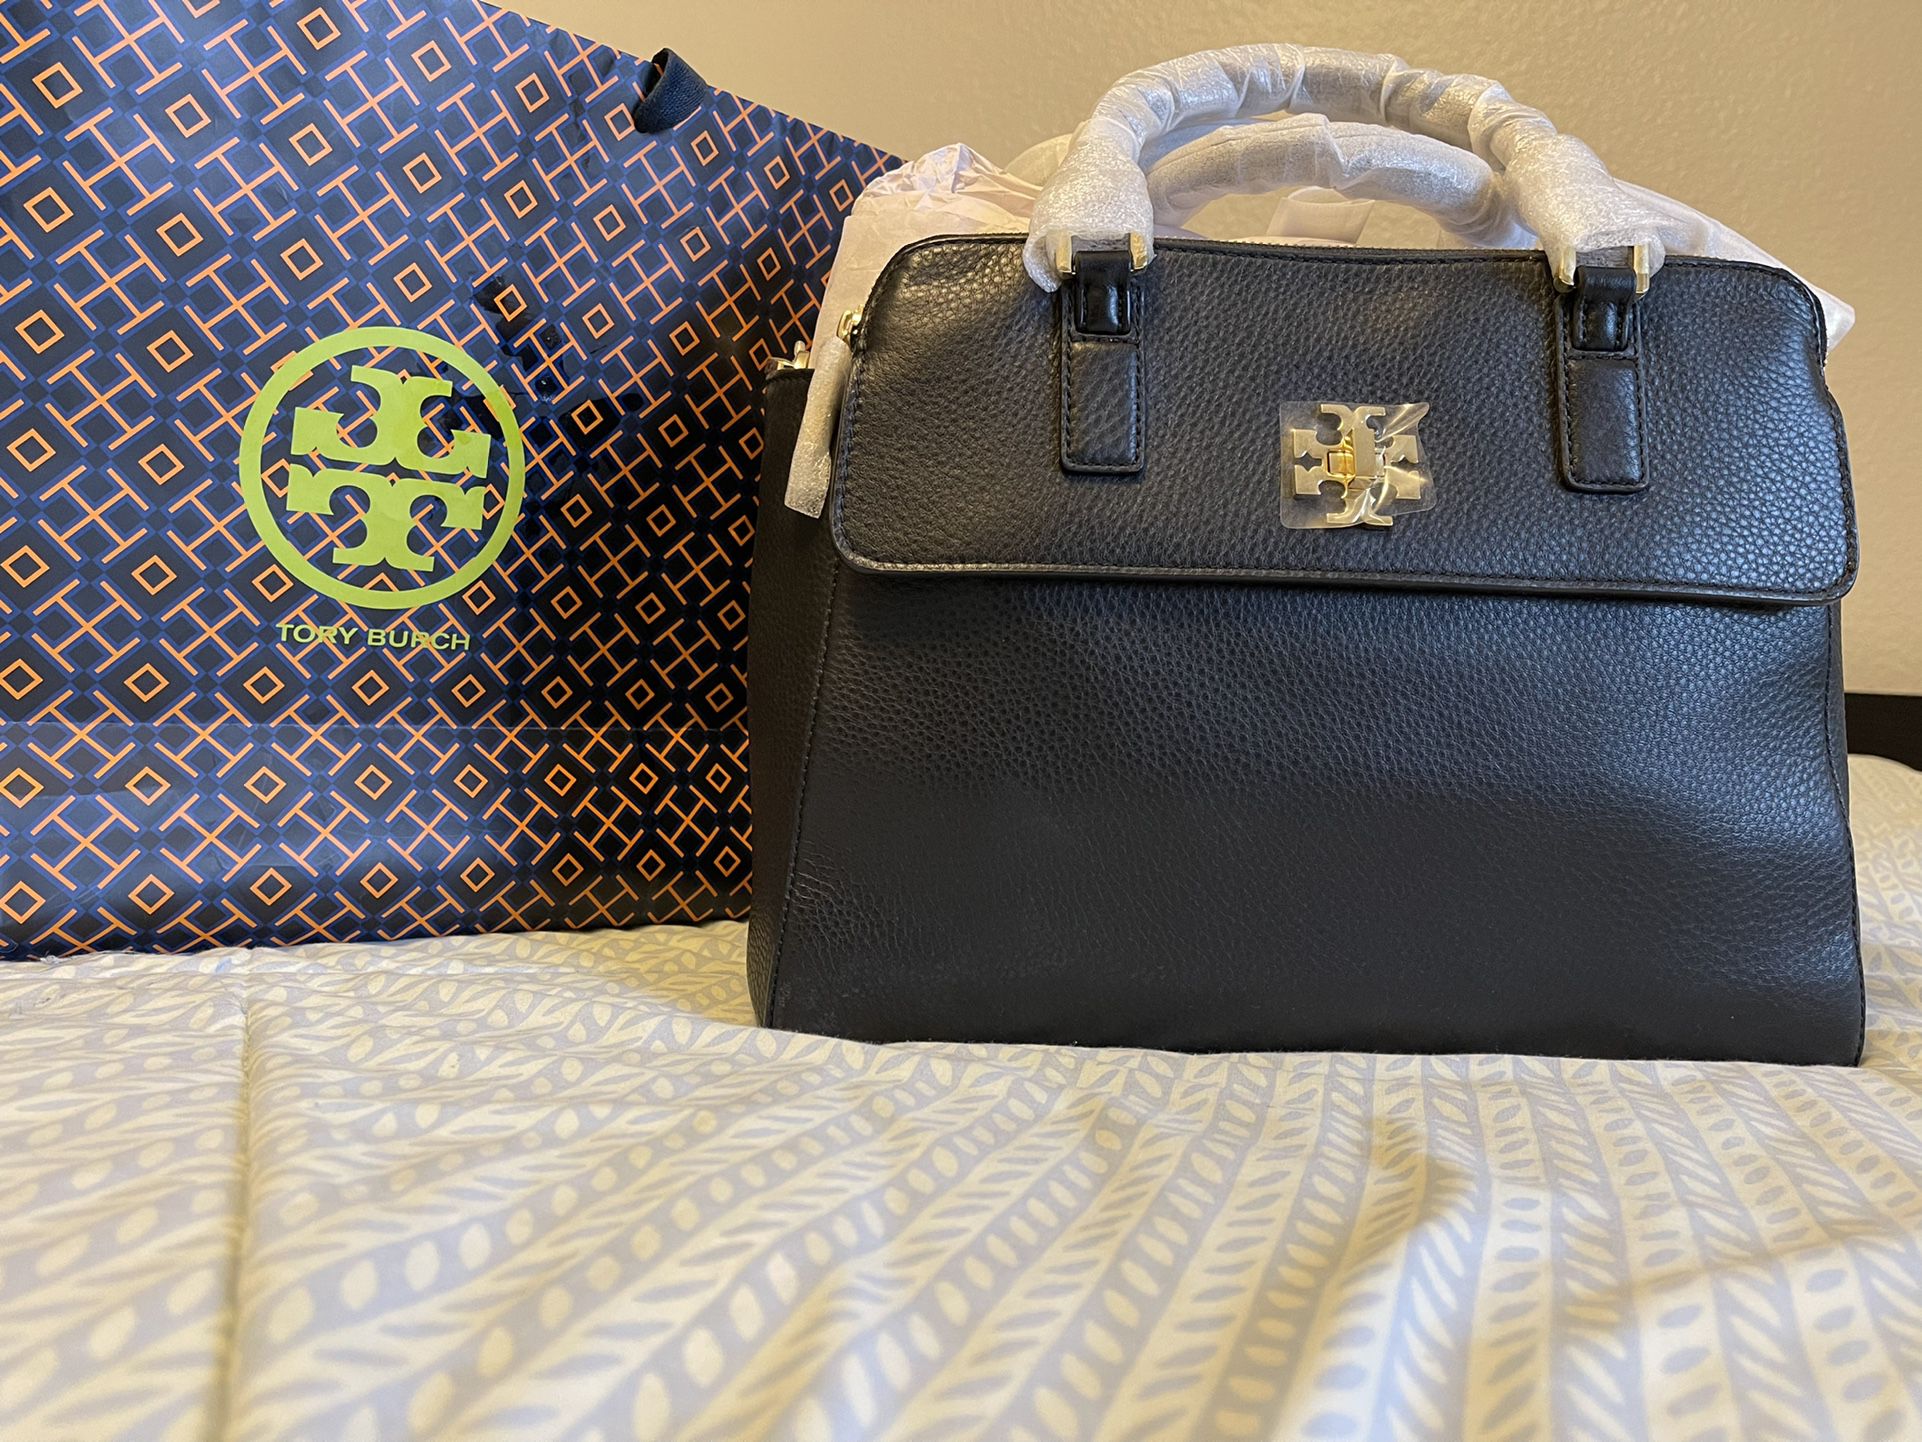 New Tory Burch Mercer Dome Bag for Sale in Everett, WA - OfferUp